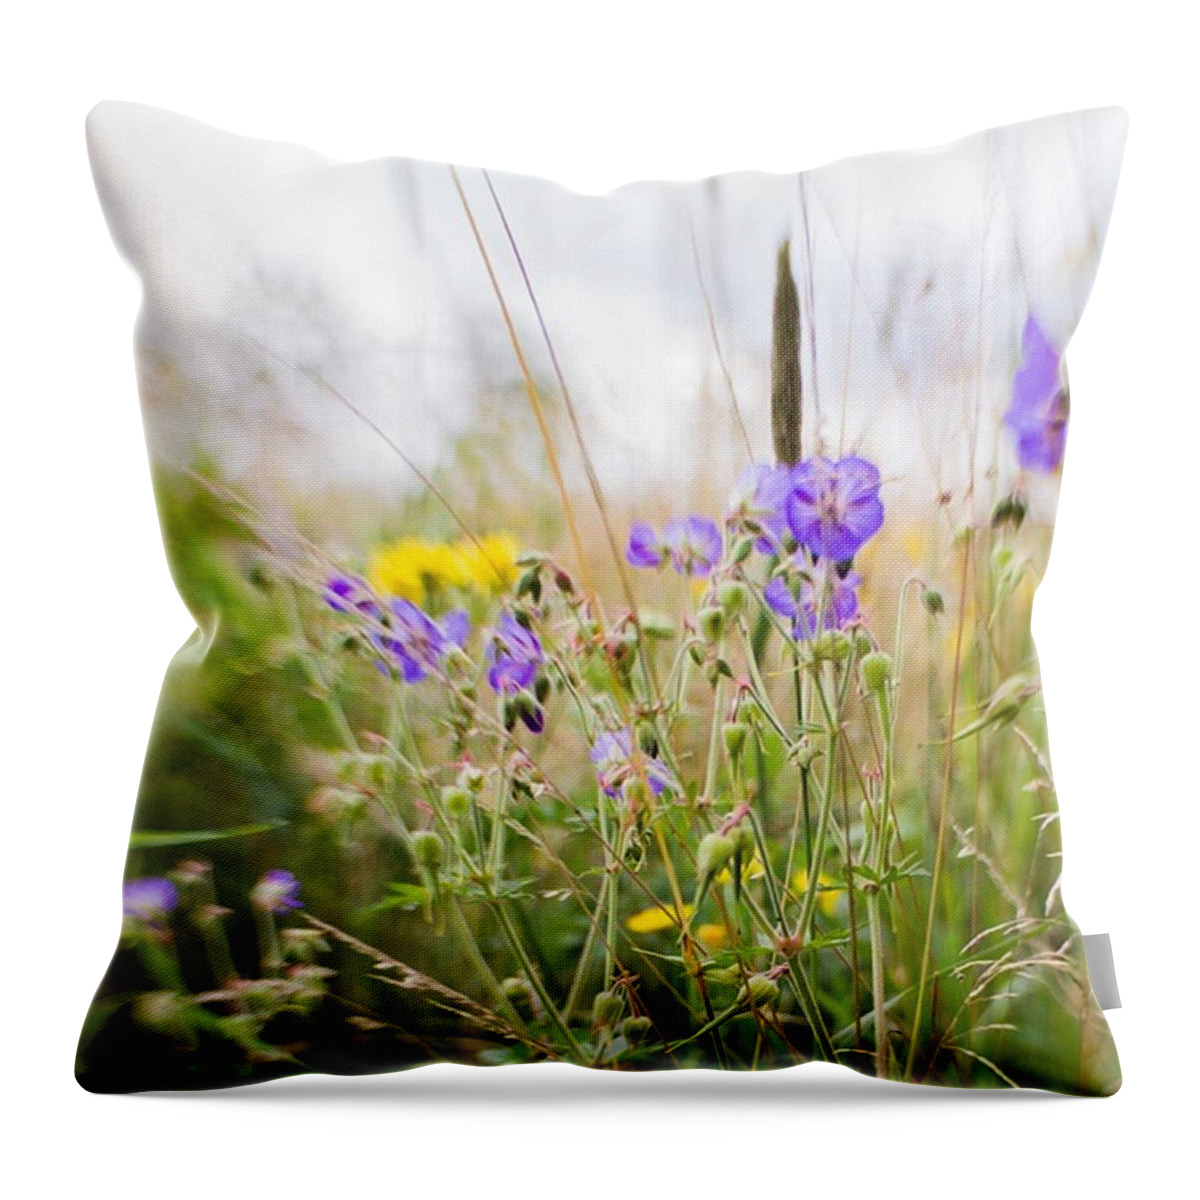 Composerpro Throw Pillow featuring the photograph #lensbaby #composerpro #sweet35 #floral by Mandy Tabatt